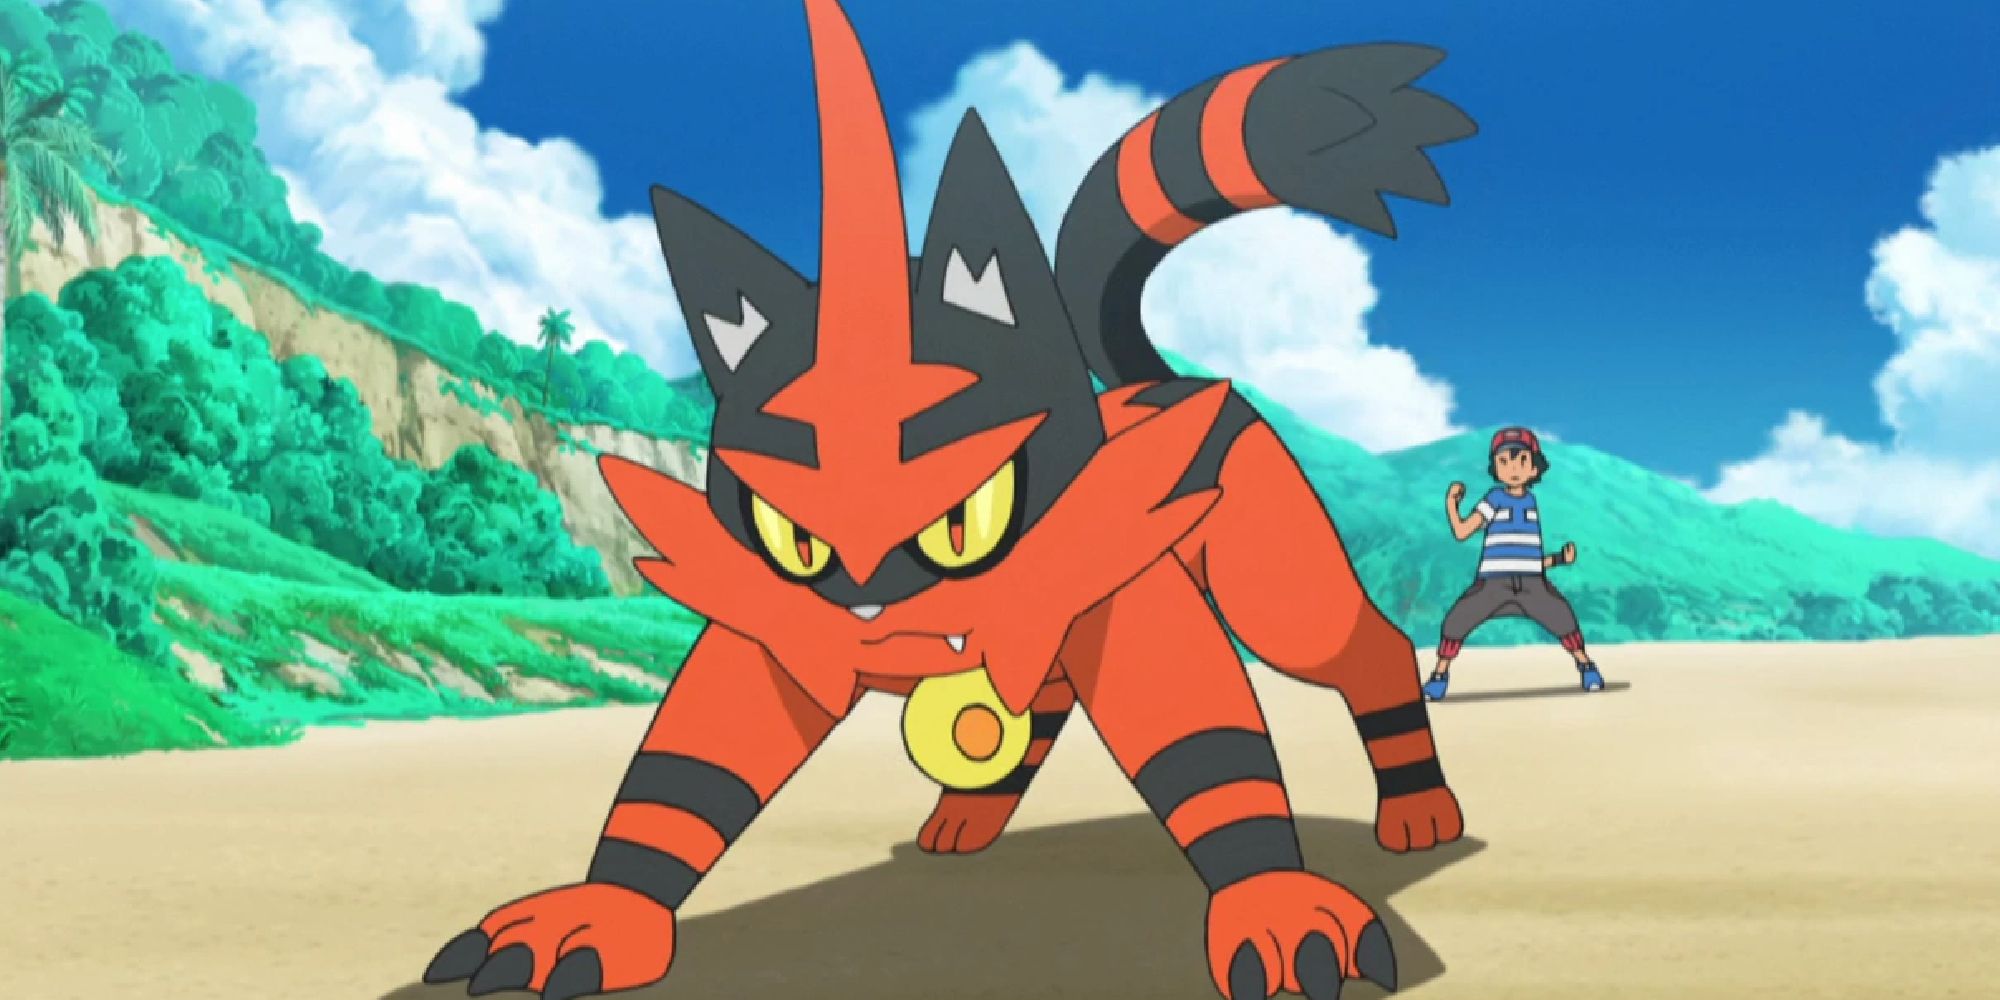 Ash sending out his Torracat in battle in the Pokemon anime